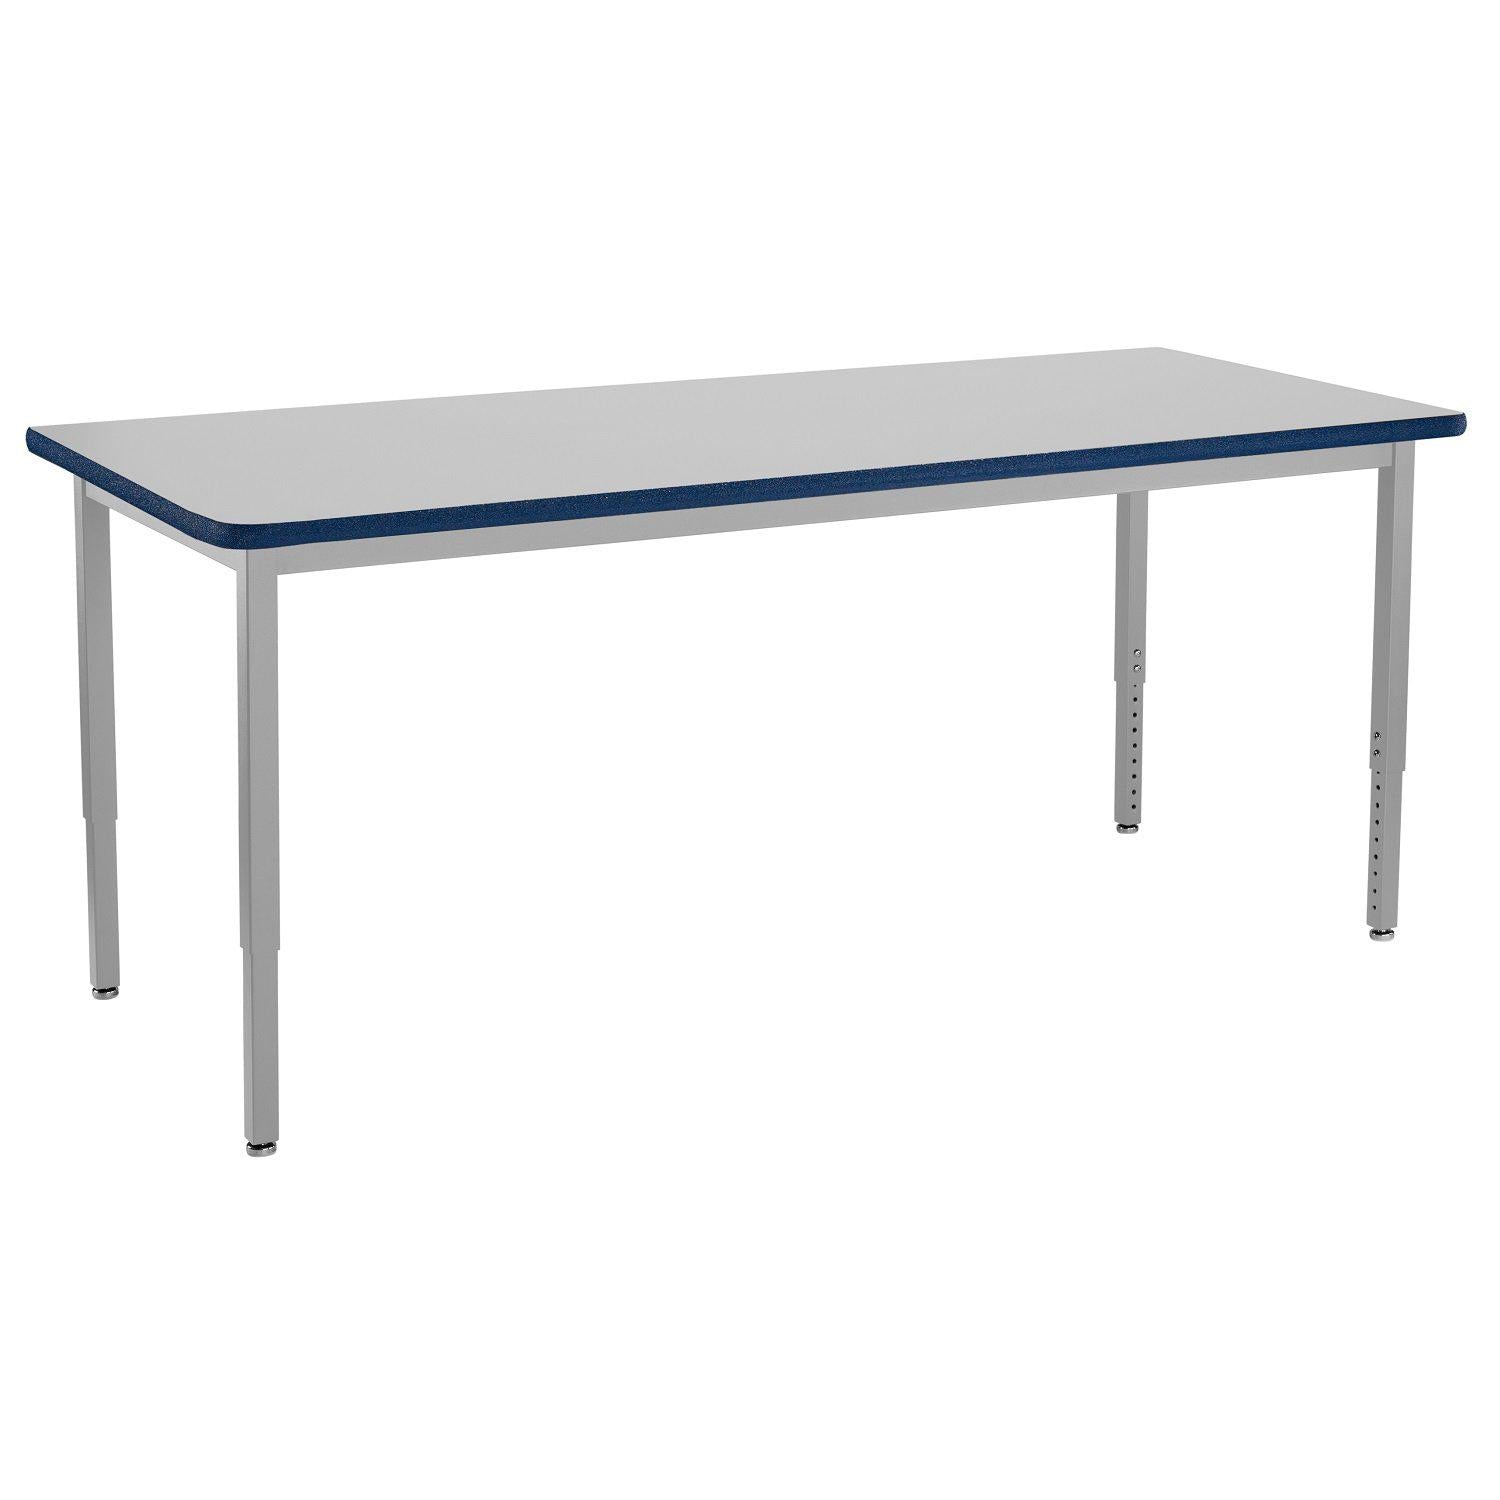 Heavy-Duty Height-Adjustable Utility Table, Soft Grey Frame, 24" x 96", Supreme High-Pressure Laminate Top with Black ProtectEdge